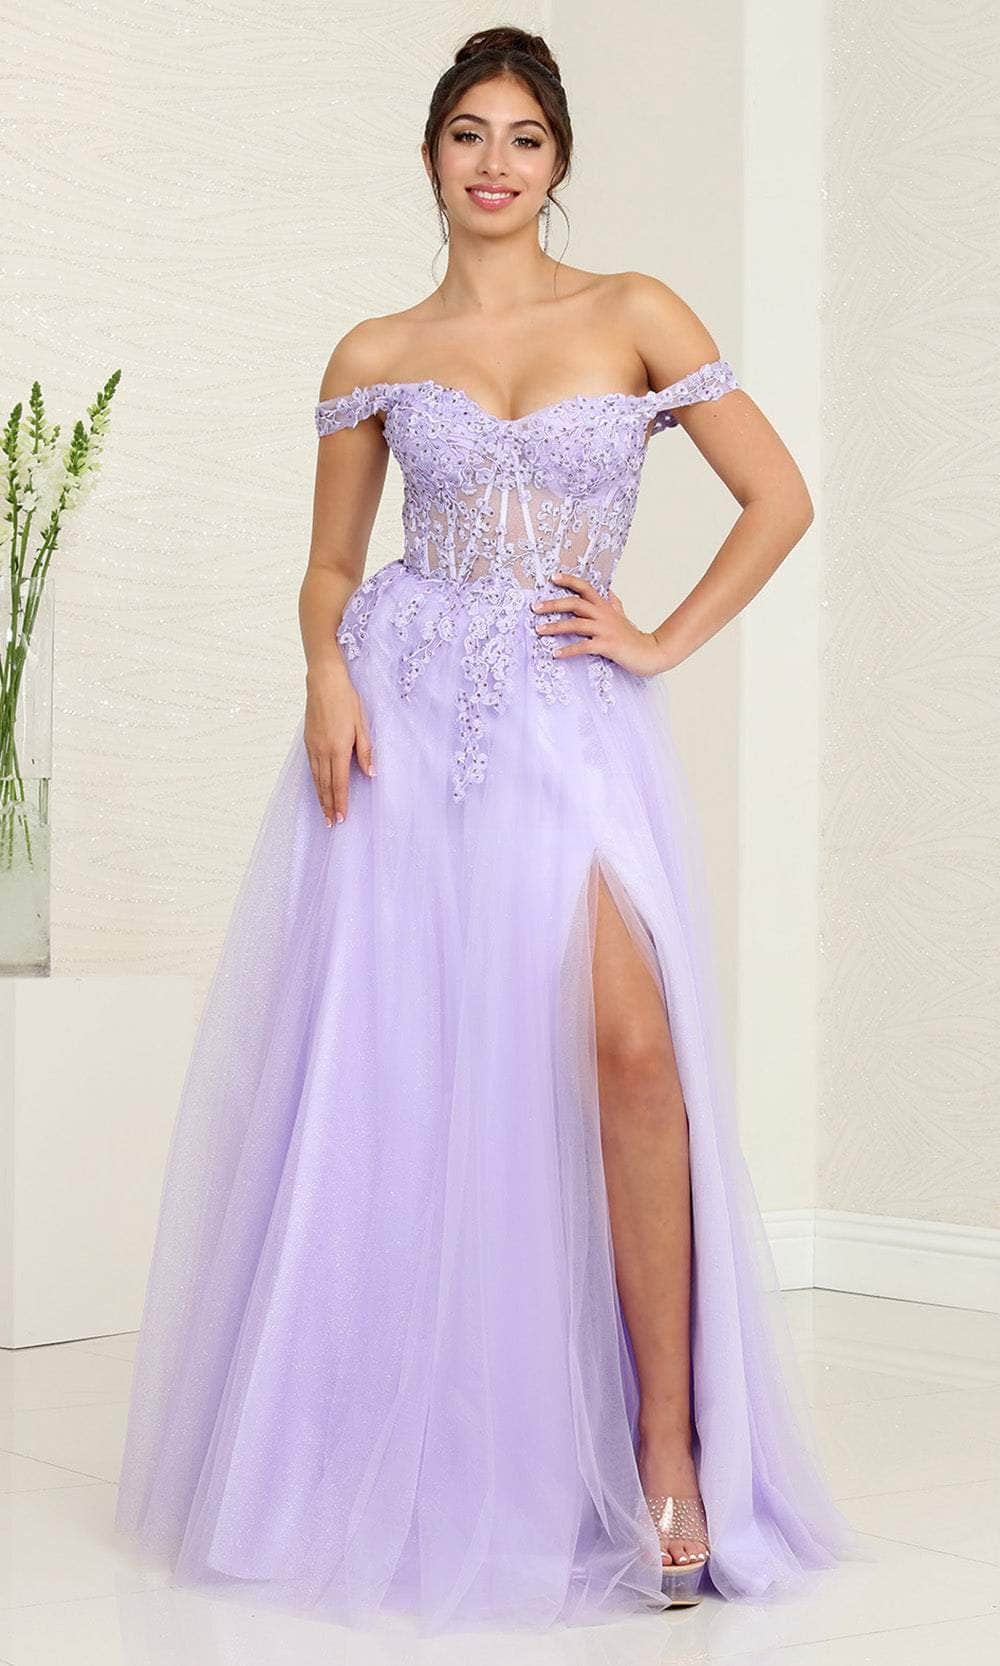 May Queen MQ2053 - Sweetheart Embellished Prom Gown Prom Dresses 4 / Lilac